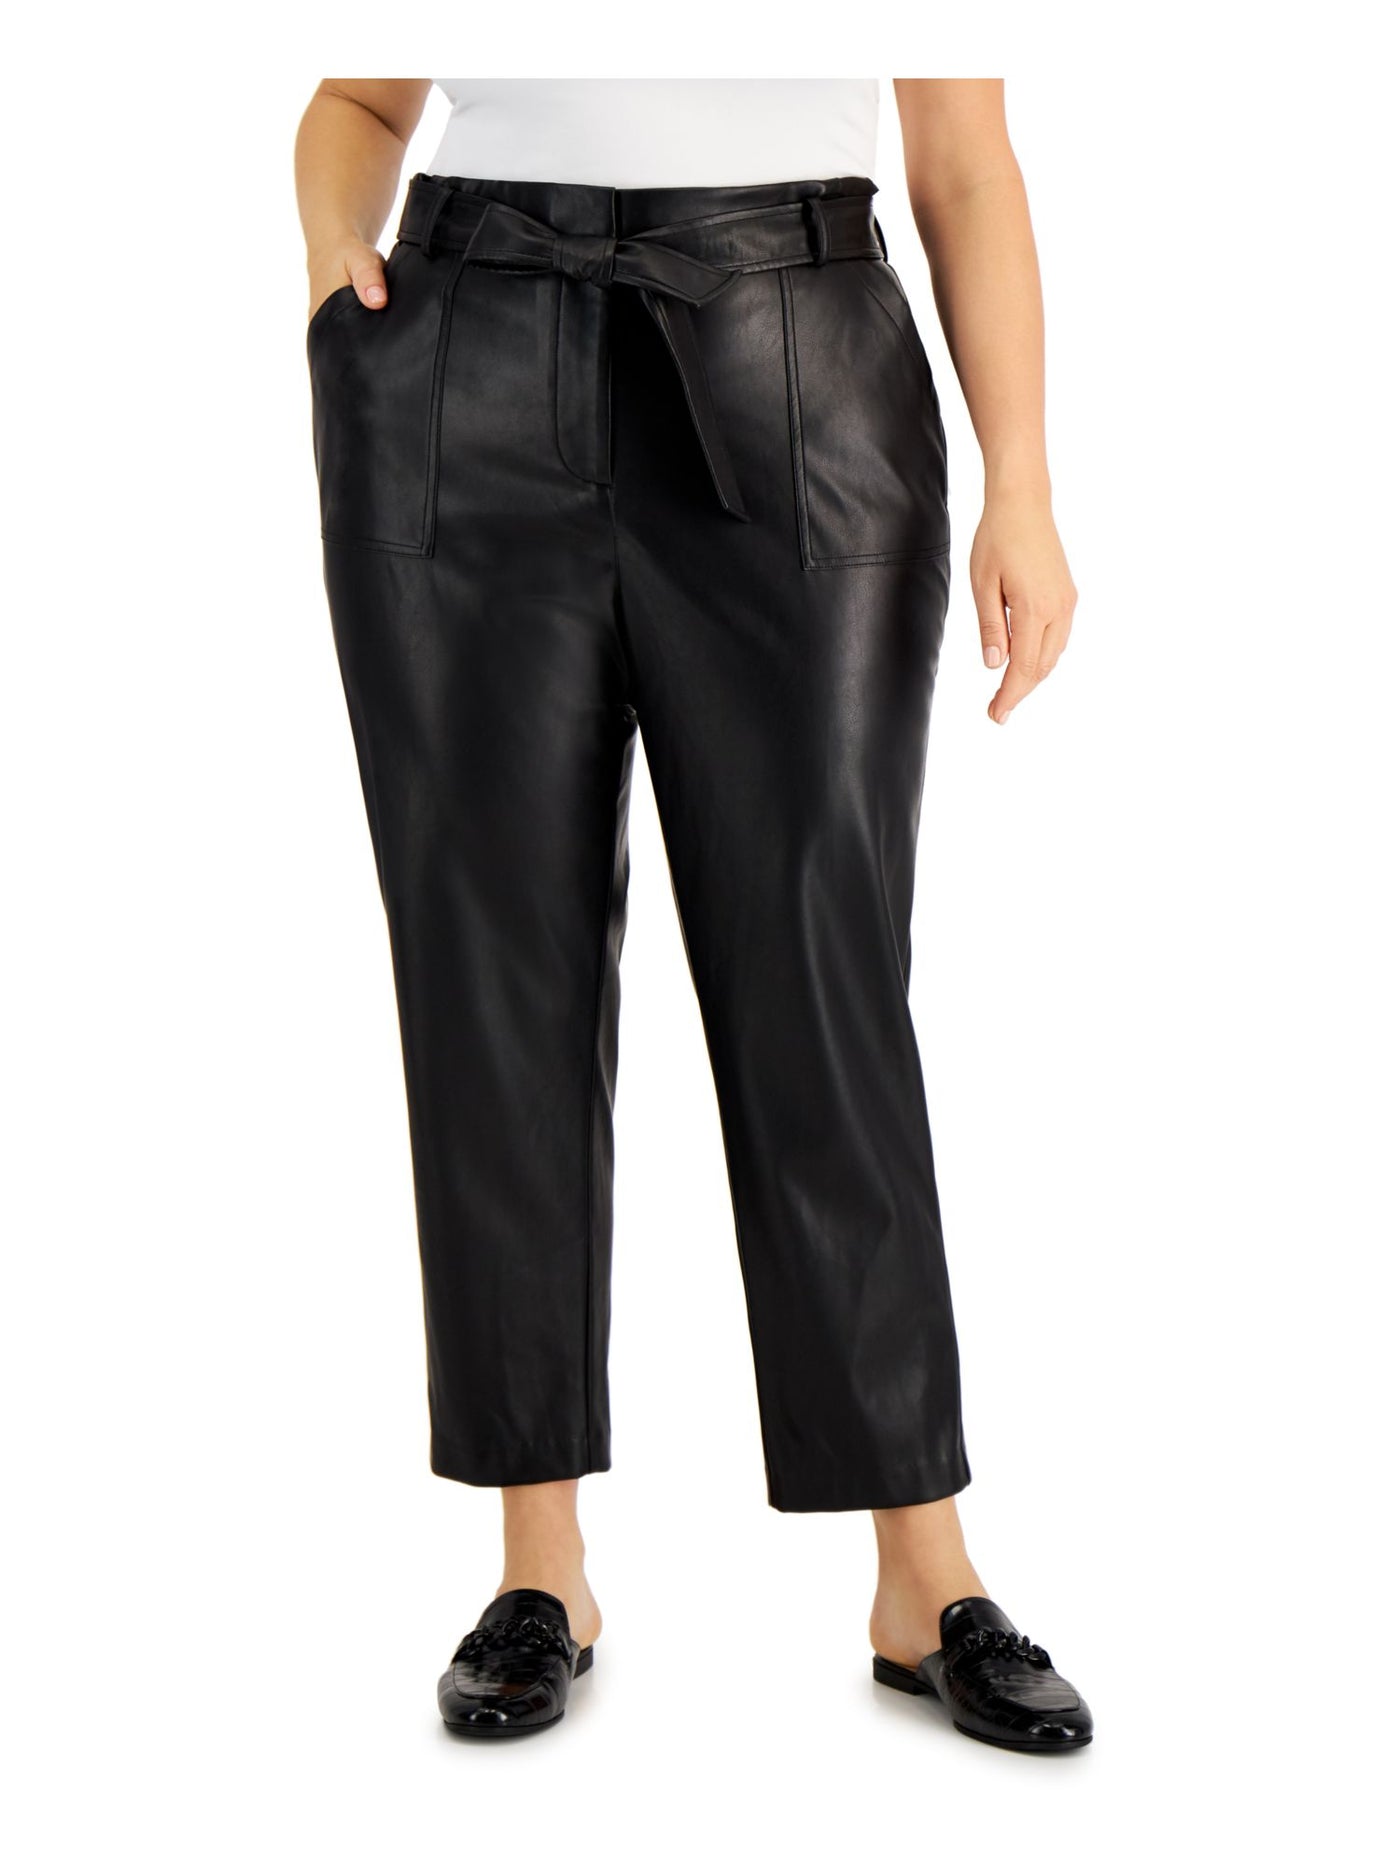 CALVIN KLEIN Womens Black Faux Leather Pocketed Belted Straight Leg Evening High Waist Pants Plus 3X